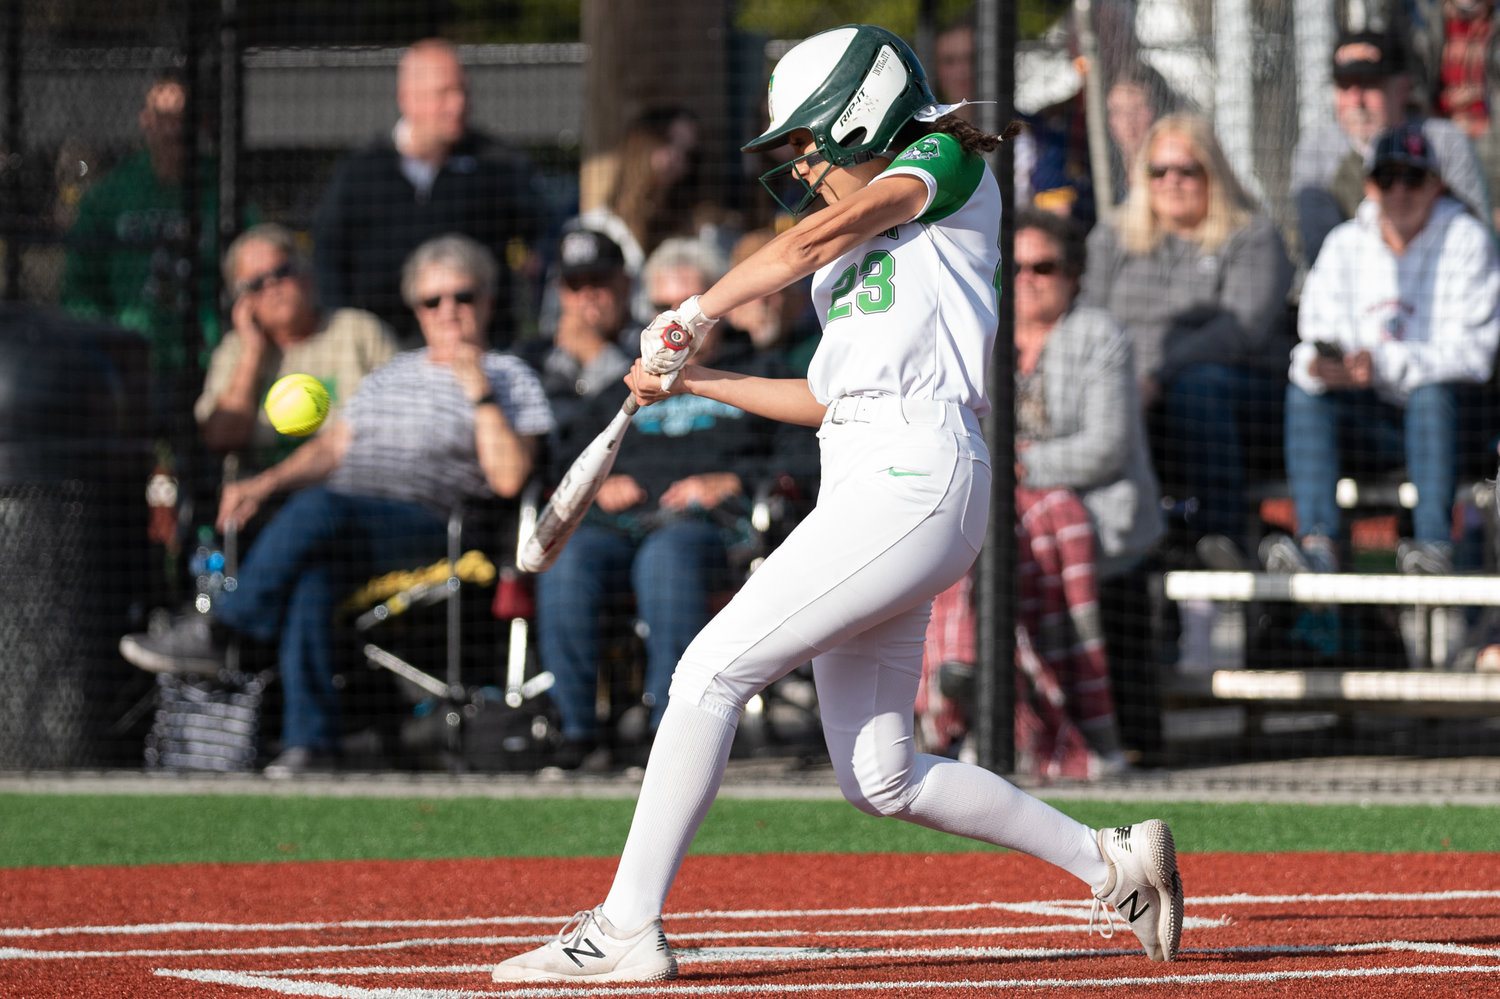 Tumwater's Jaylene Manriquez makes contact with a pitch against W.F. West in the 2A District 4 championship game at Rec Park May 20.